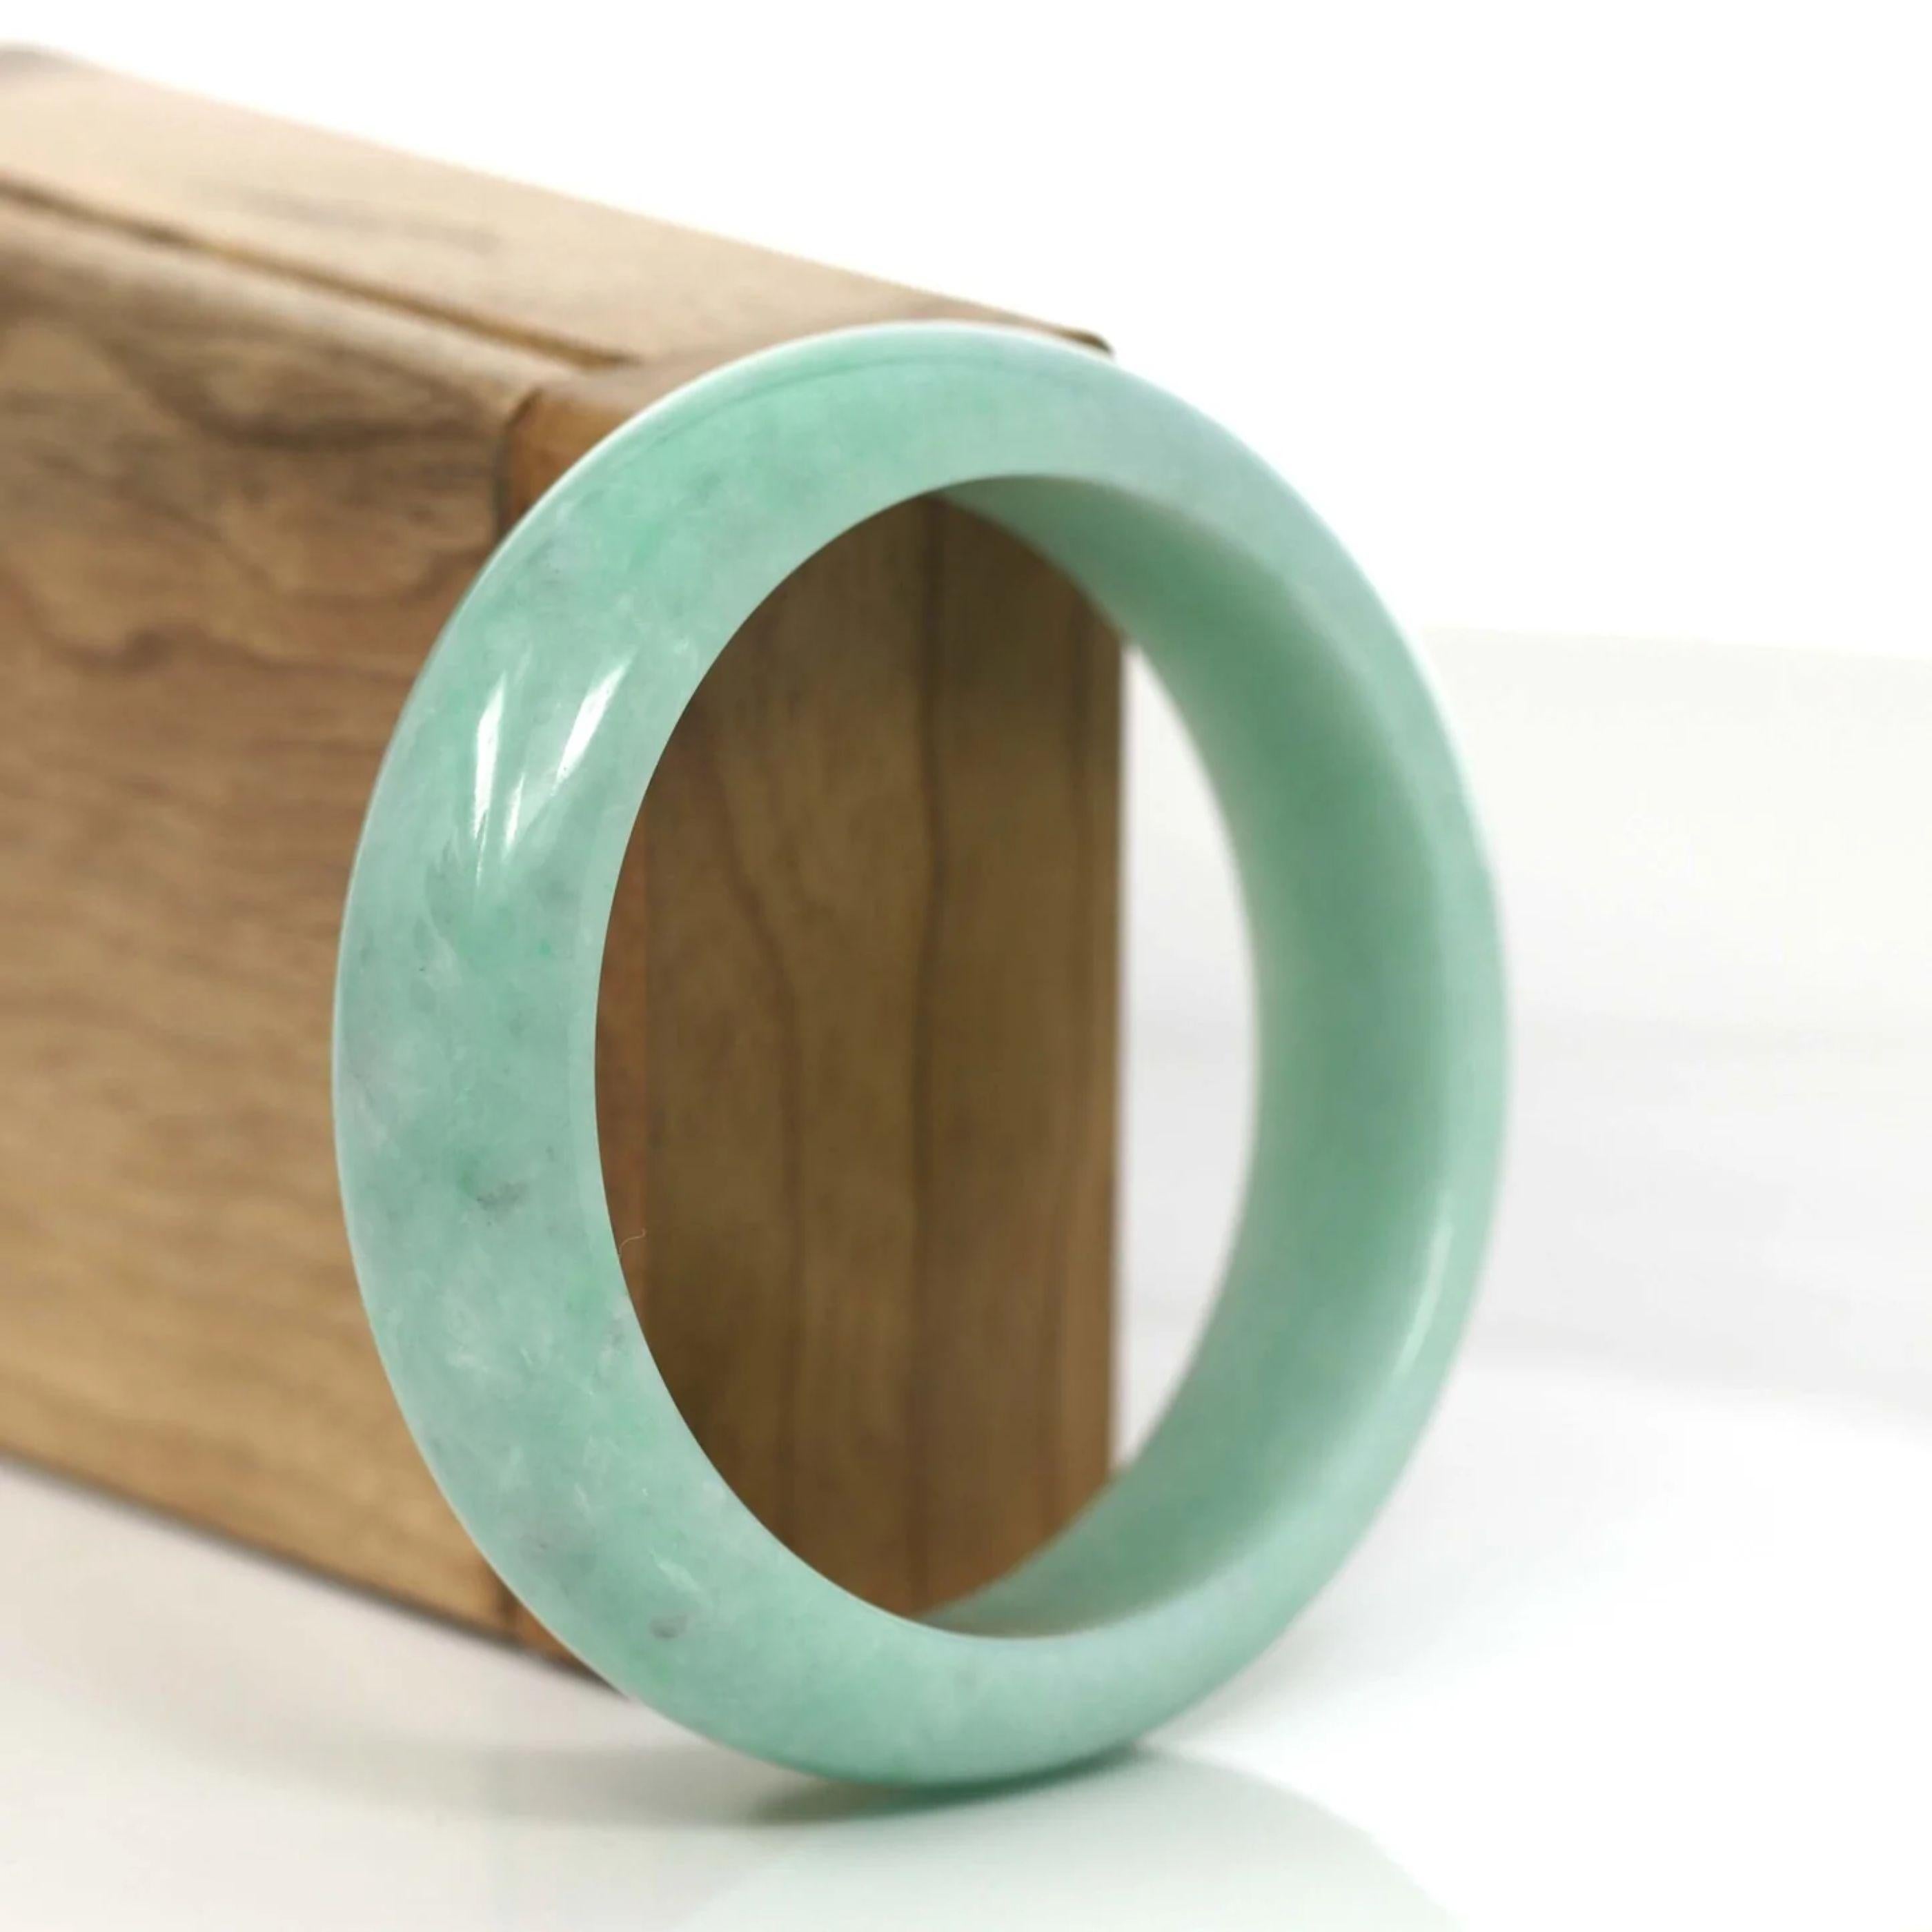 * DETAILS---This bangle is made with very high quality genuine Burmese Jadeite jade. The jade texture is very smooth and translucent with even apple green color through out. This is a luxury and perfect bangle. The Classic half-round comfort wider